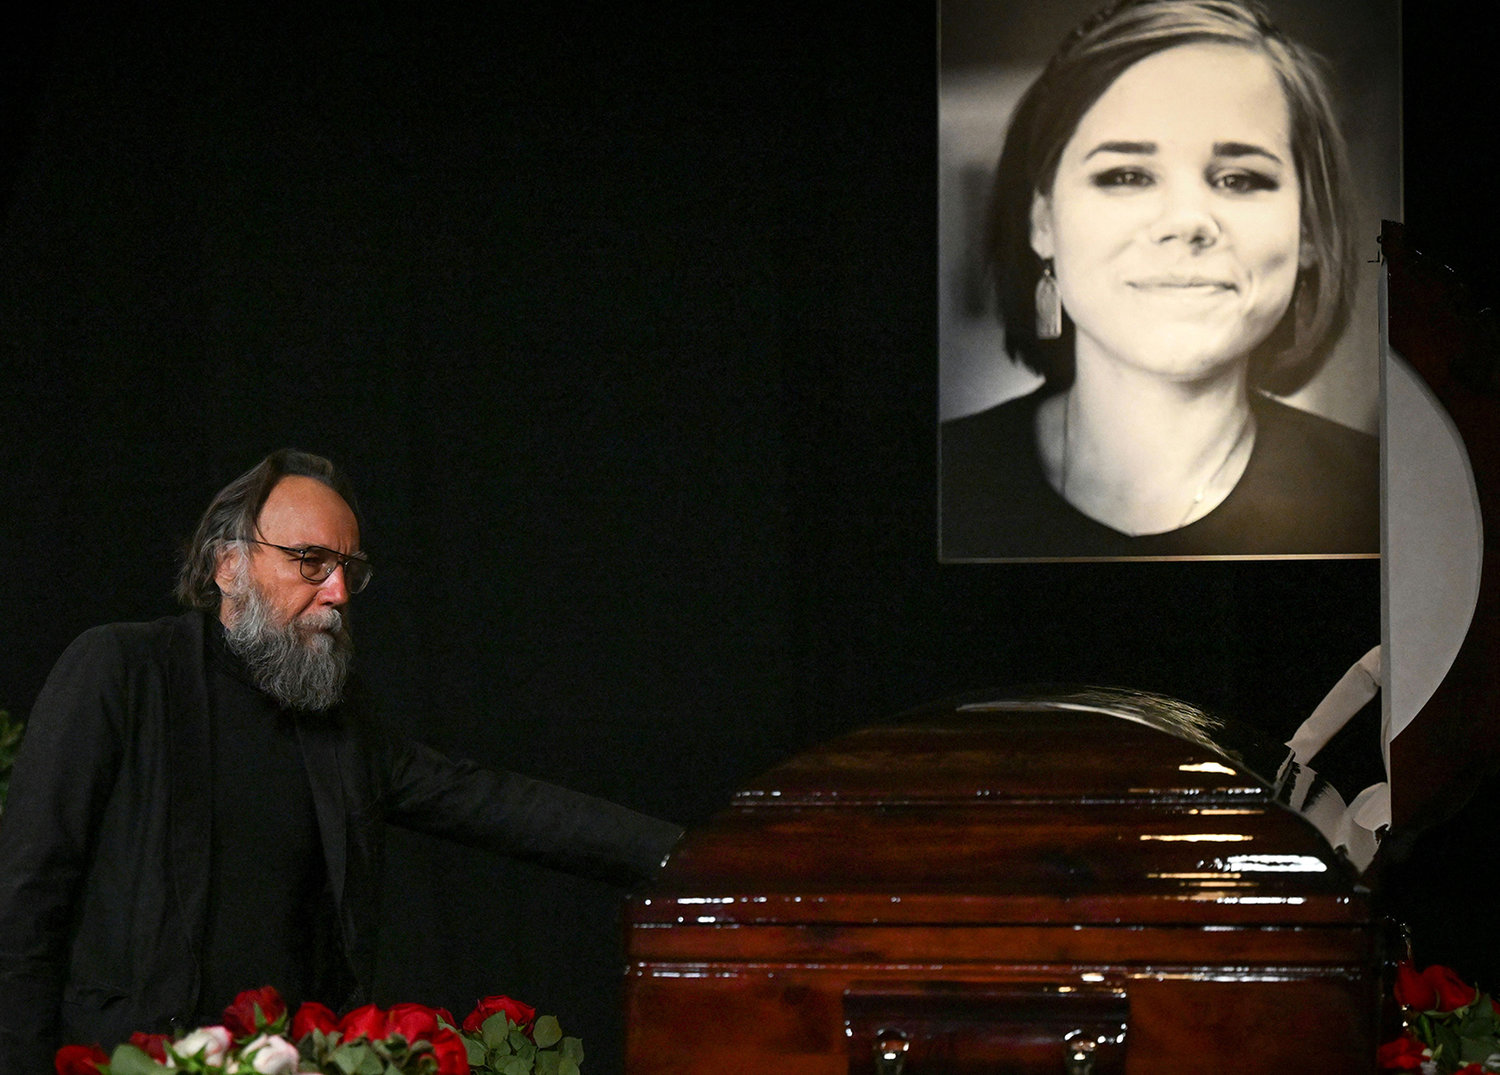 Russian ideologue Alexander Dugin attends a farewell ceremony of his daughter Daria Dugina, who was killed in a car bomb explosion the previous week, at the Ostankino TV centre in Moscow on Aug. 23, 2022. - Daria Dugina followed in her father's footsteps, becoming a well-known media personality who worked for pro-Kremlin television channels including Russia Today and Tsargrad. (Kirill Kudryavtsev/AFP via Getty Images/TNS)